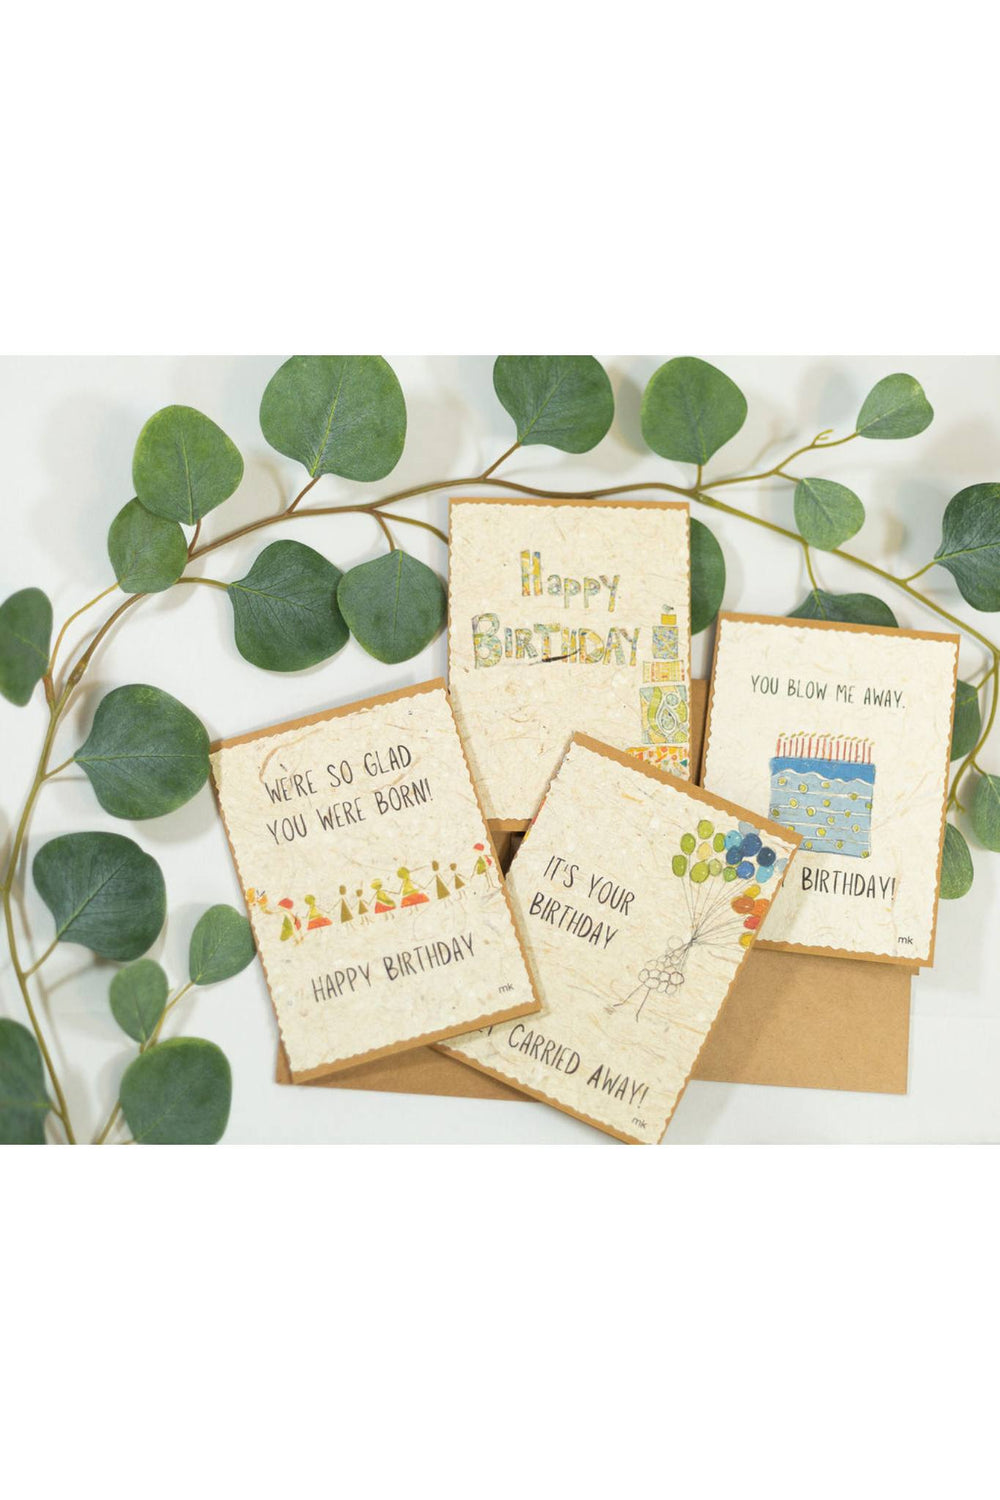 Banana Paper Birthday Cards by 2nd Story Goods